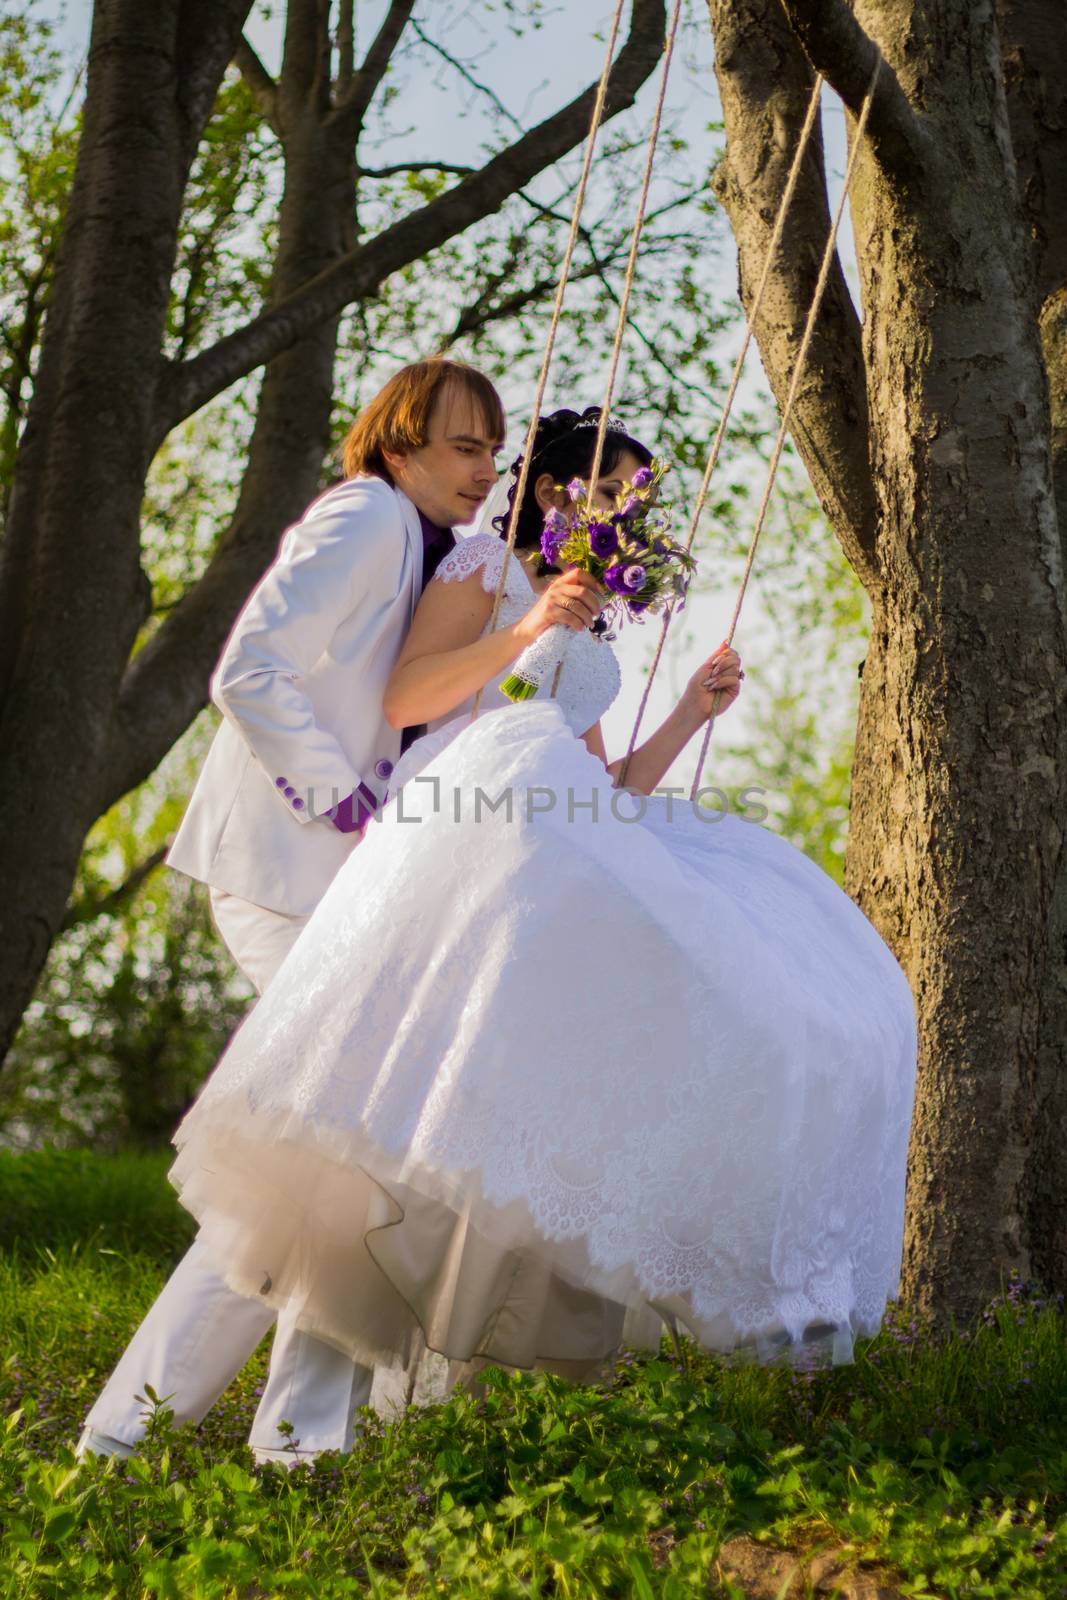 bride and groom swinging on a swing. For your commercial and editorial use.